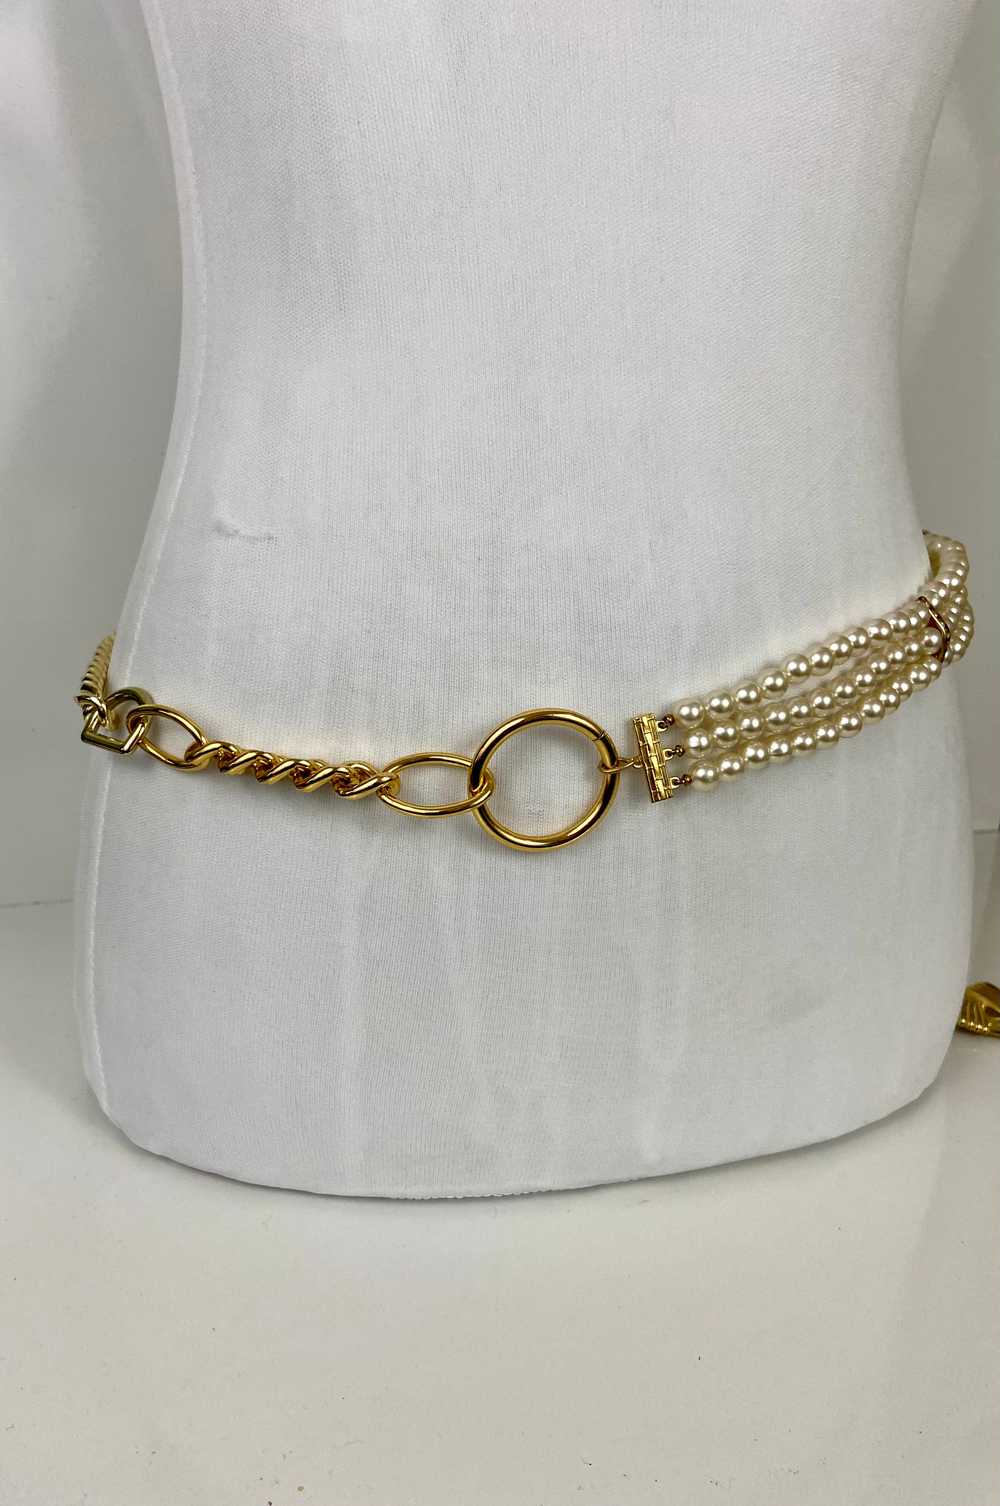 Pearl and gold belt - image 5